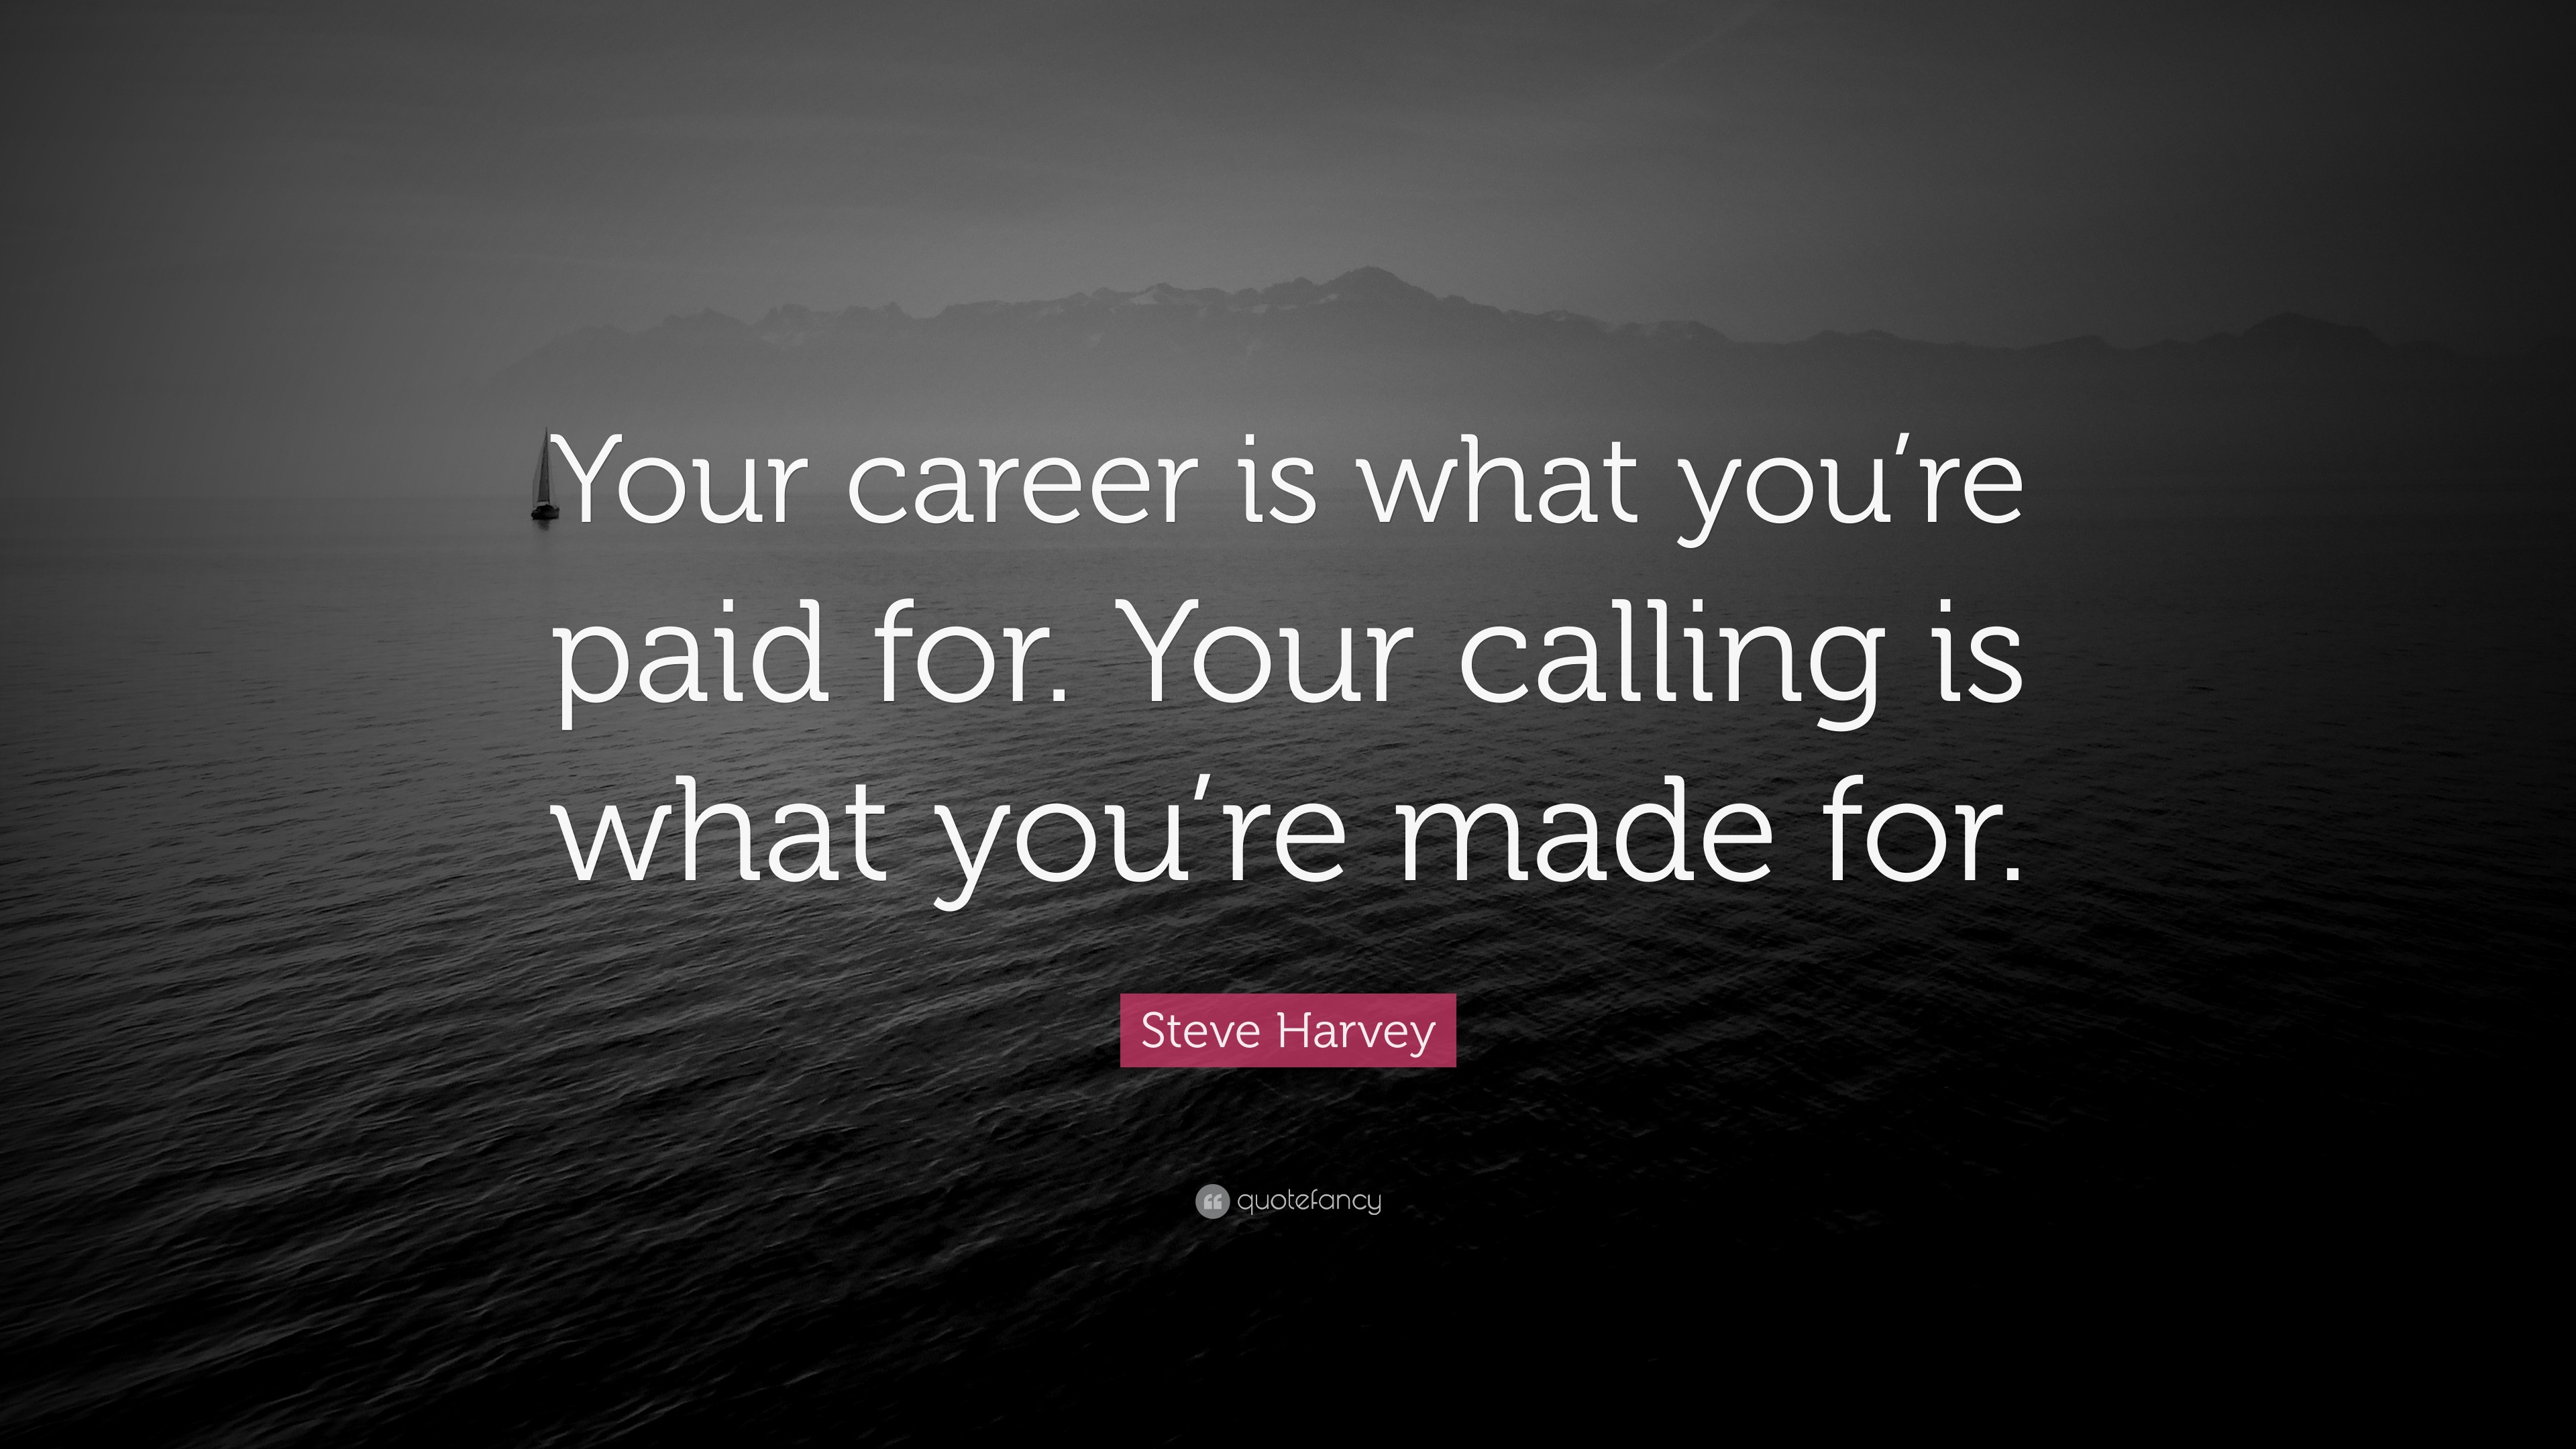 Steve Harvey Quote “Your career is what you’re paid for